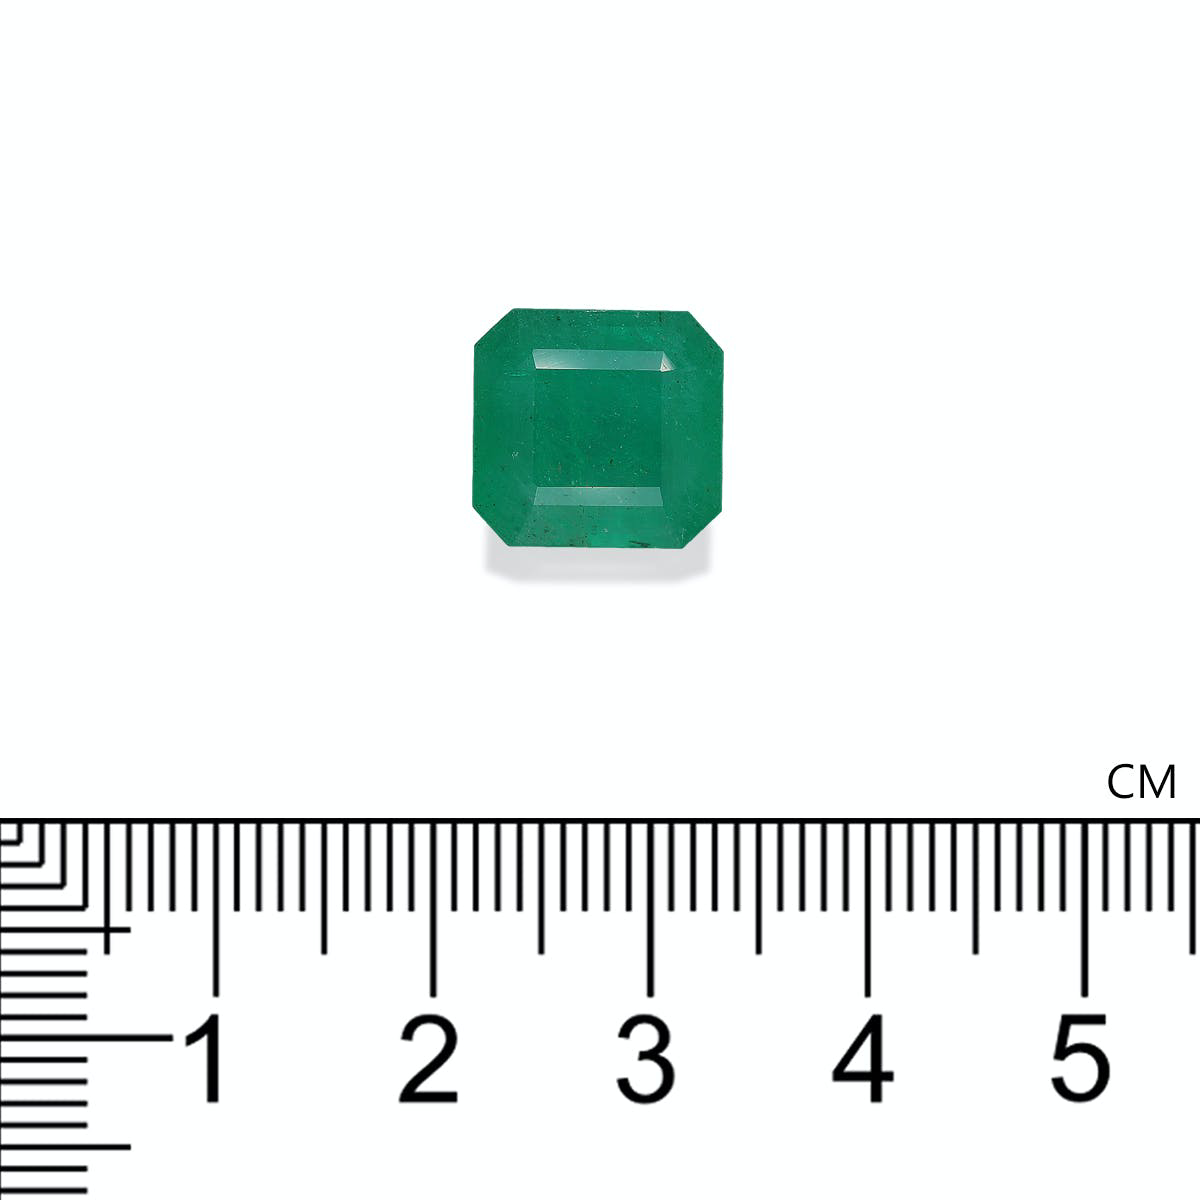 Picture of Green Zambian Emerald 7.66ct - 11mm (PG0253)